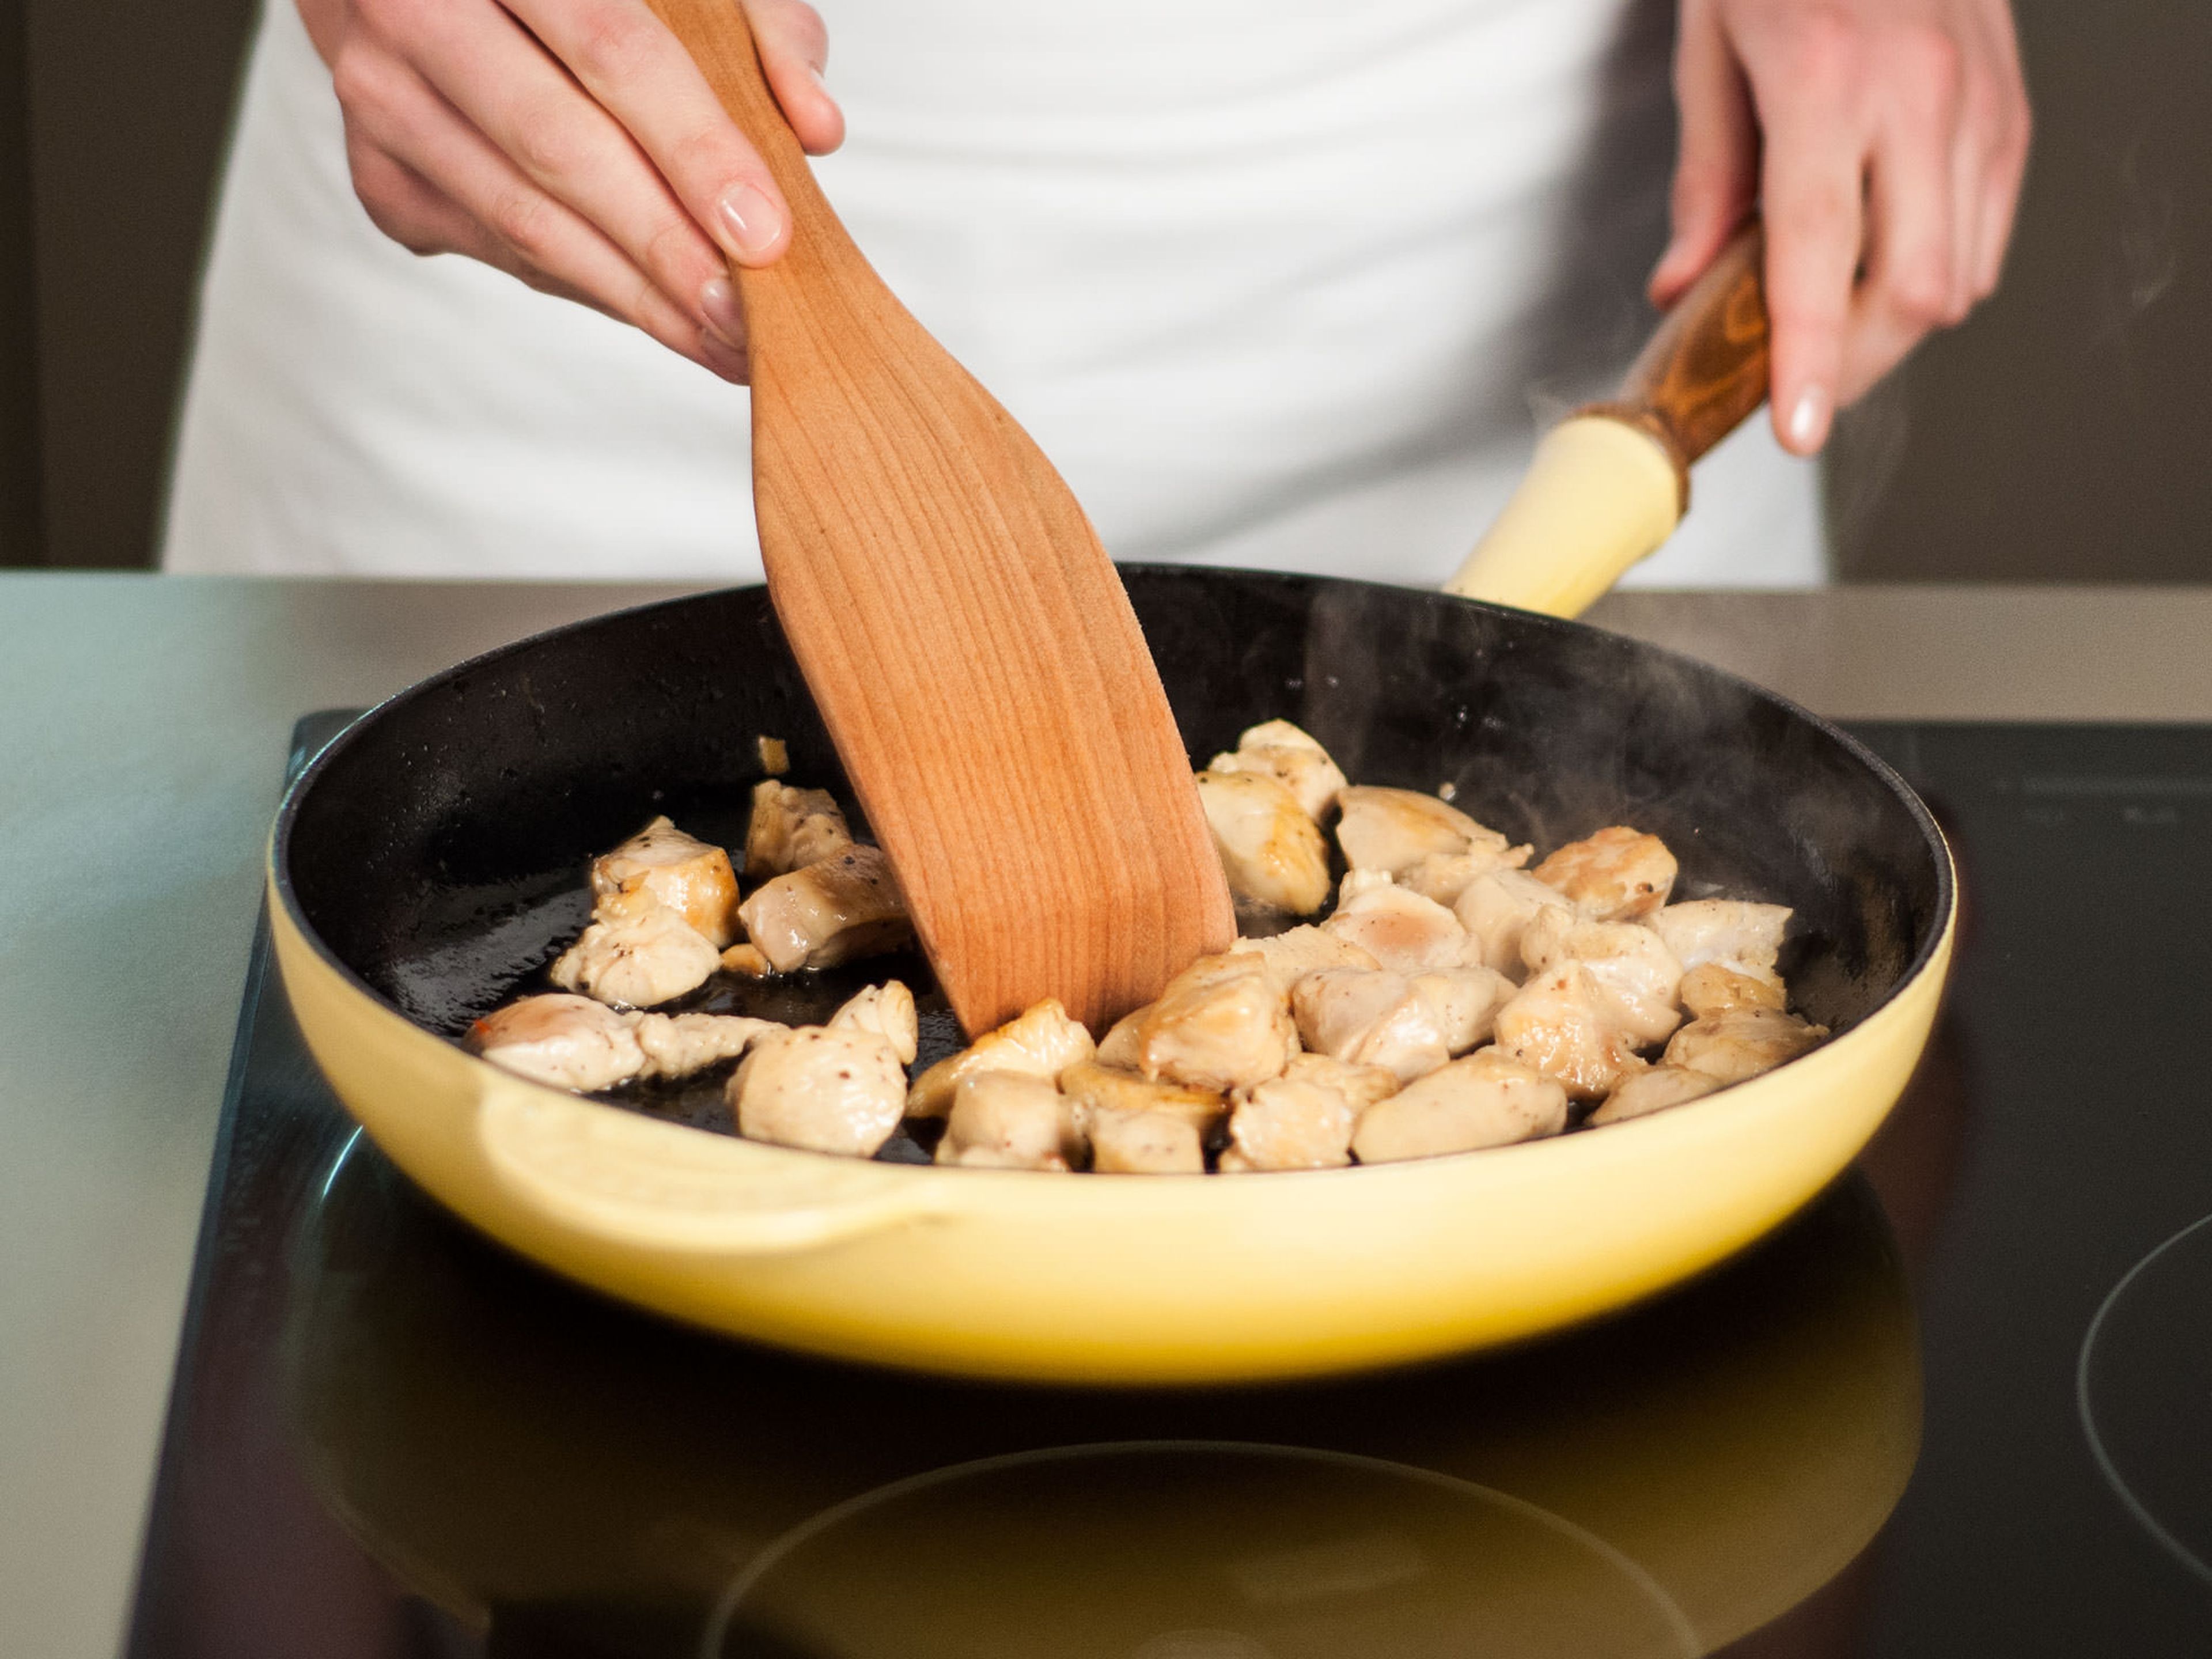 In a frying pan, sauté chicken in some vegetable oil over medium-high heat for approx. 7 - 10 min. until browned. Season with salt and pepper. Set aside and allow to cool.